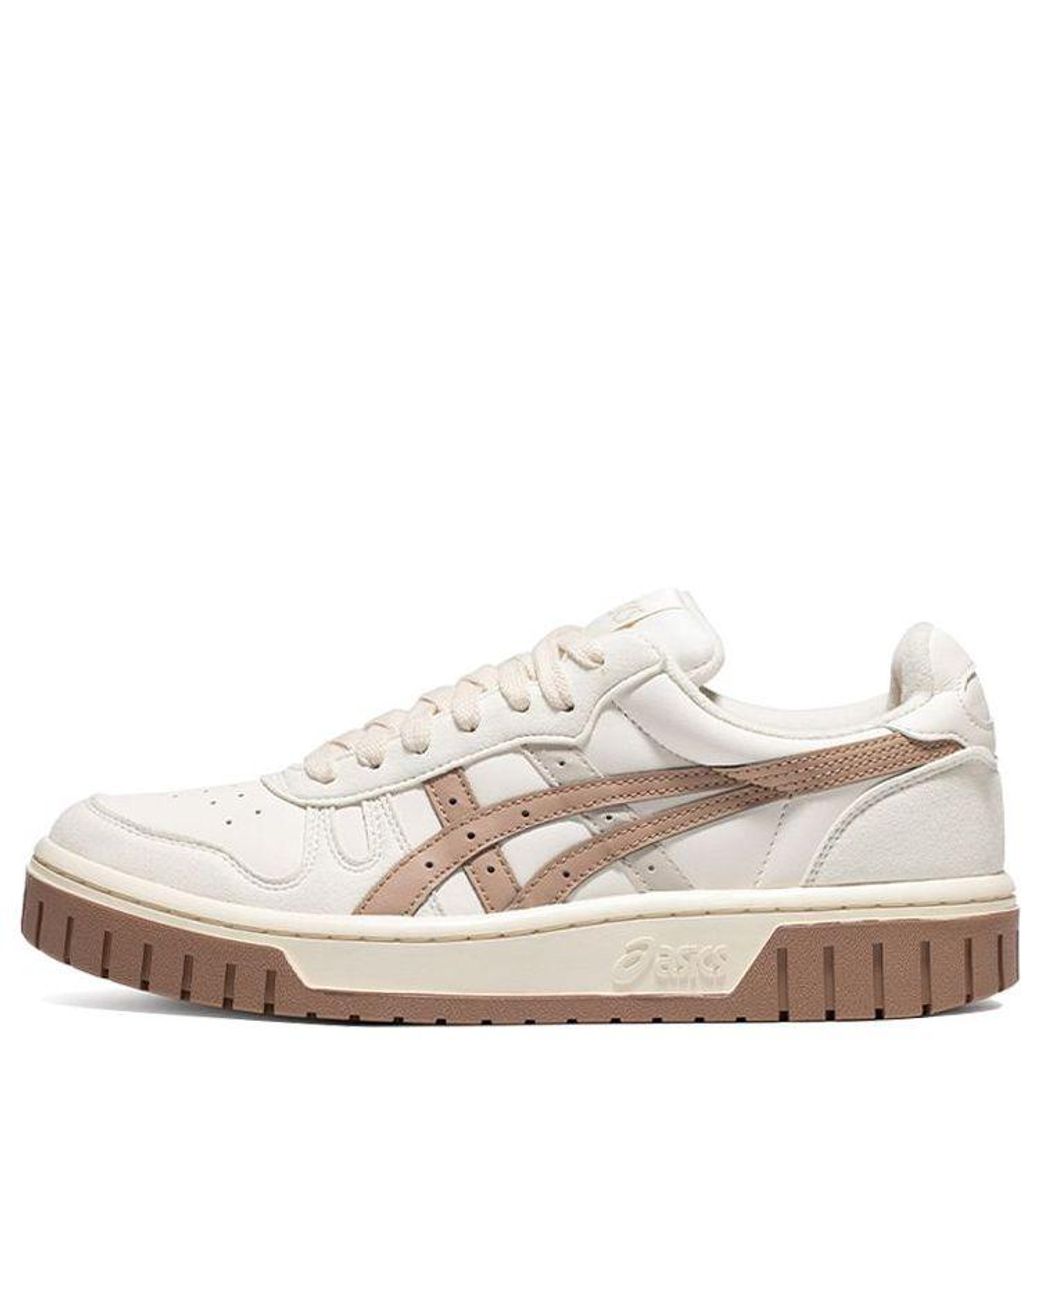 Asics Court Mz Retro Casual Skateboarding Shoes White Brown | Lyst